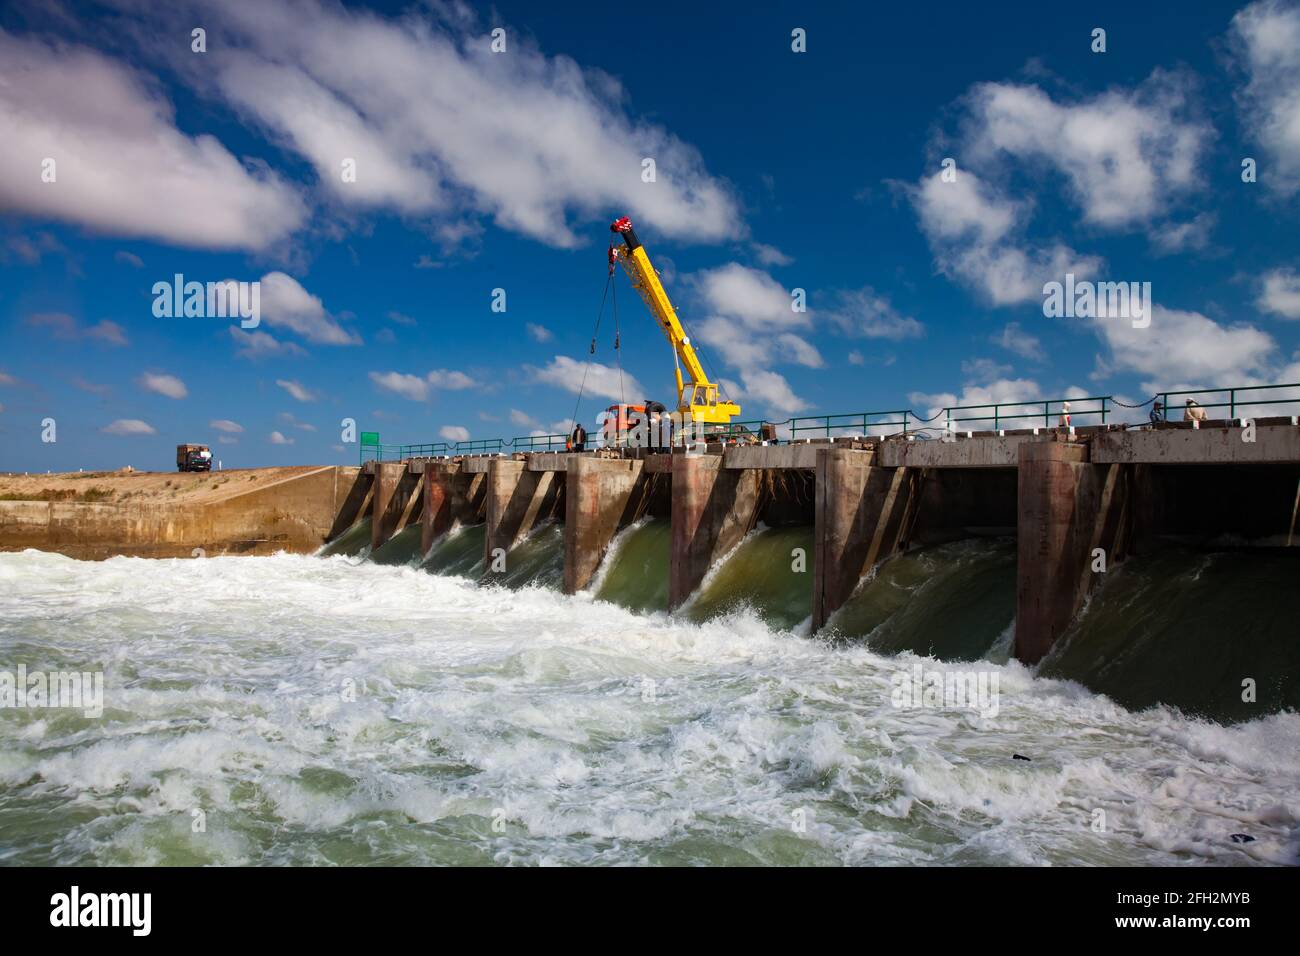 Kok-aral,Kazakhstan:Aral Sea Kok-aral dam.Water discharge in flood.Open shutters.Yellow mobile crane and workers on dam Stock Photo